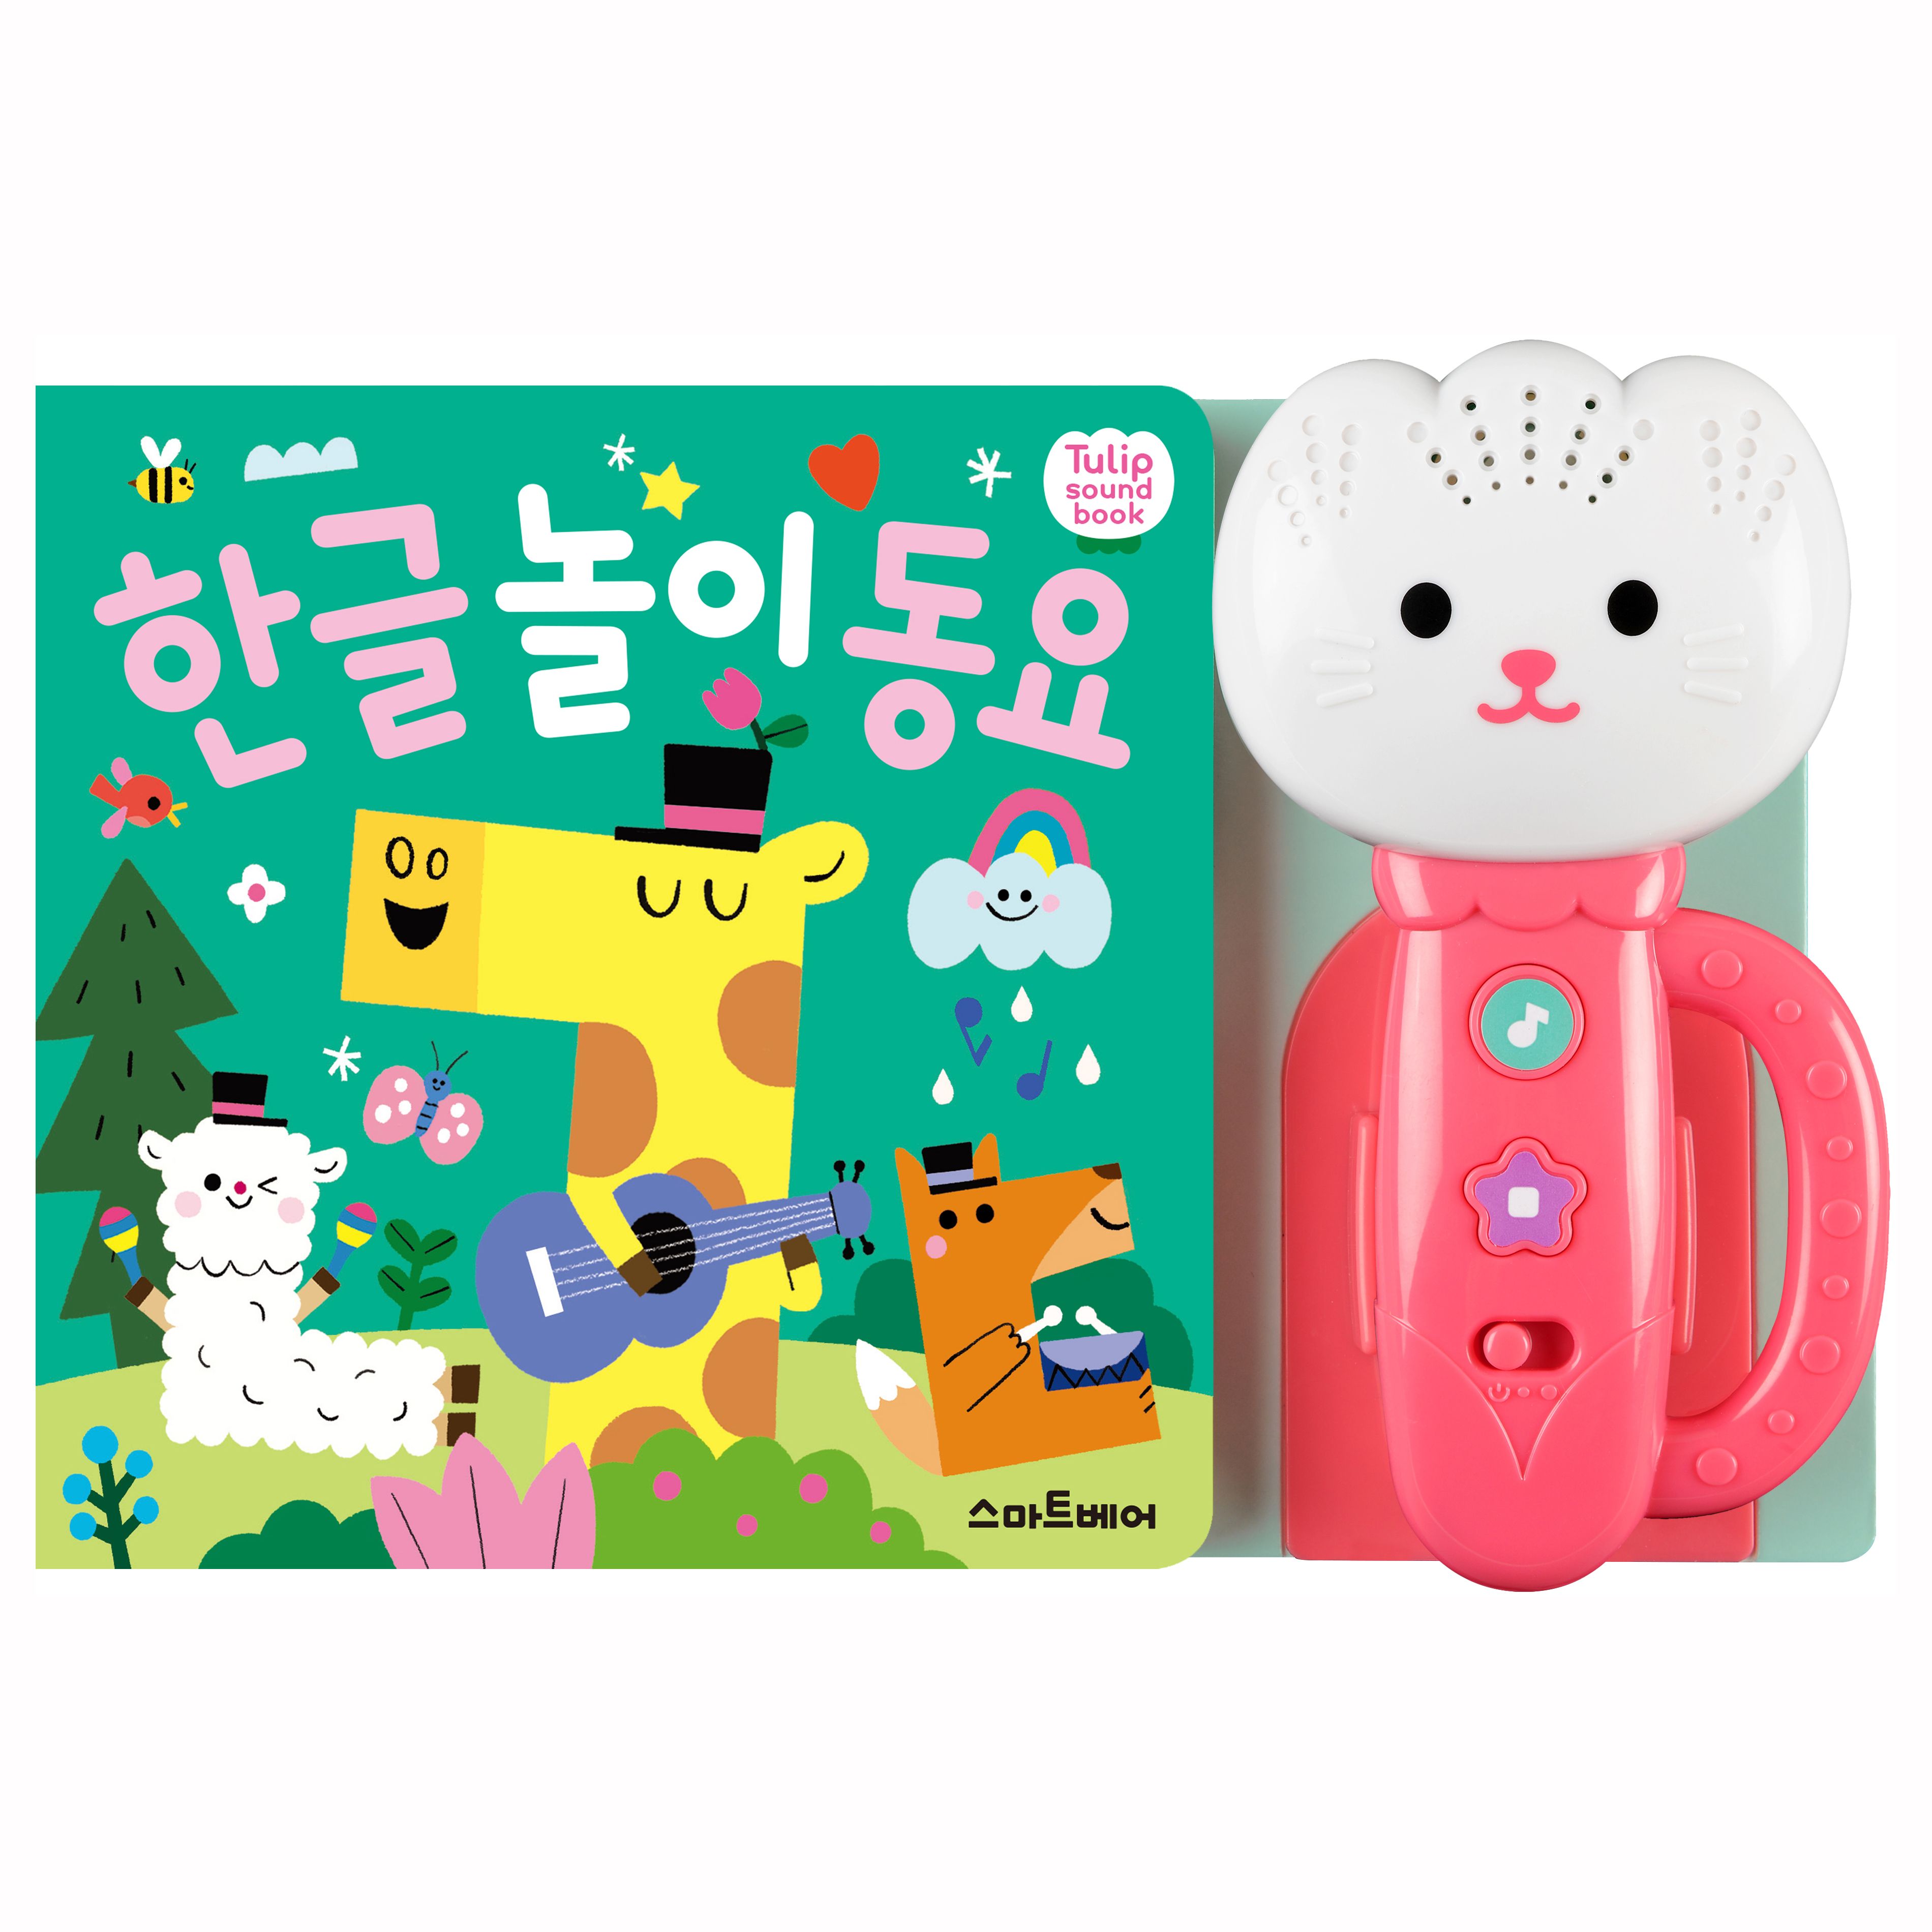 Tulip Sound Book Korean Learning Songs